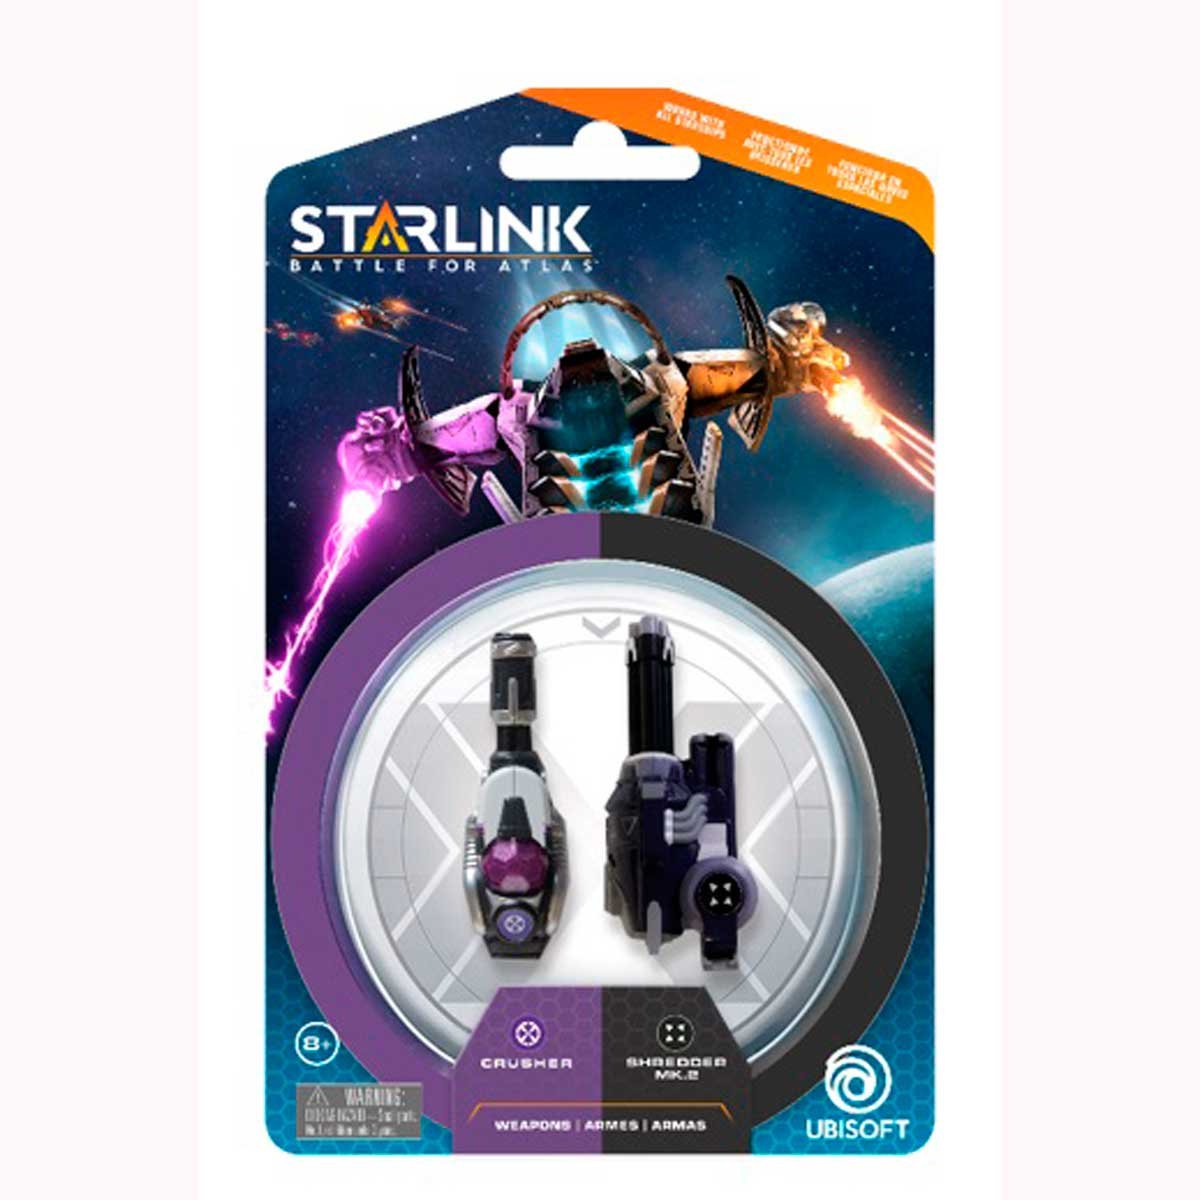 Starlink Battle For Atlas Crusher Weapon Pack